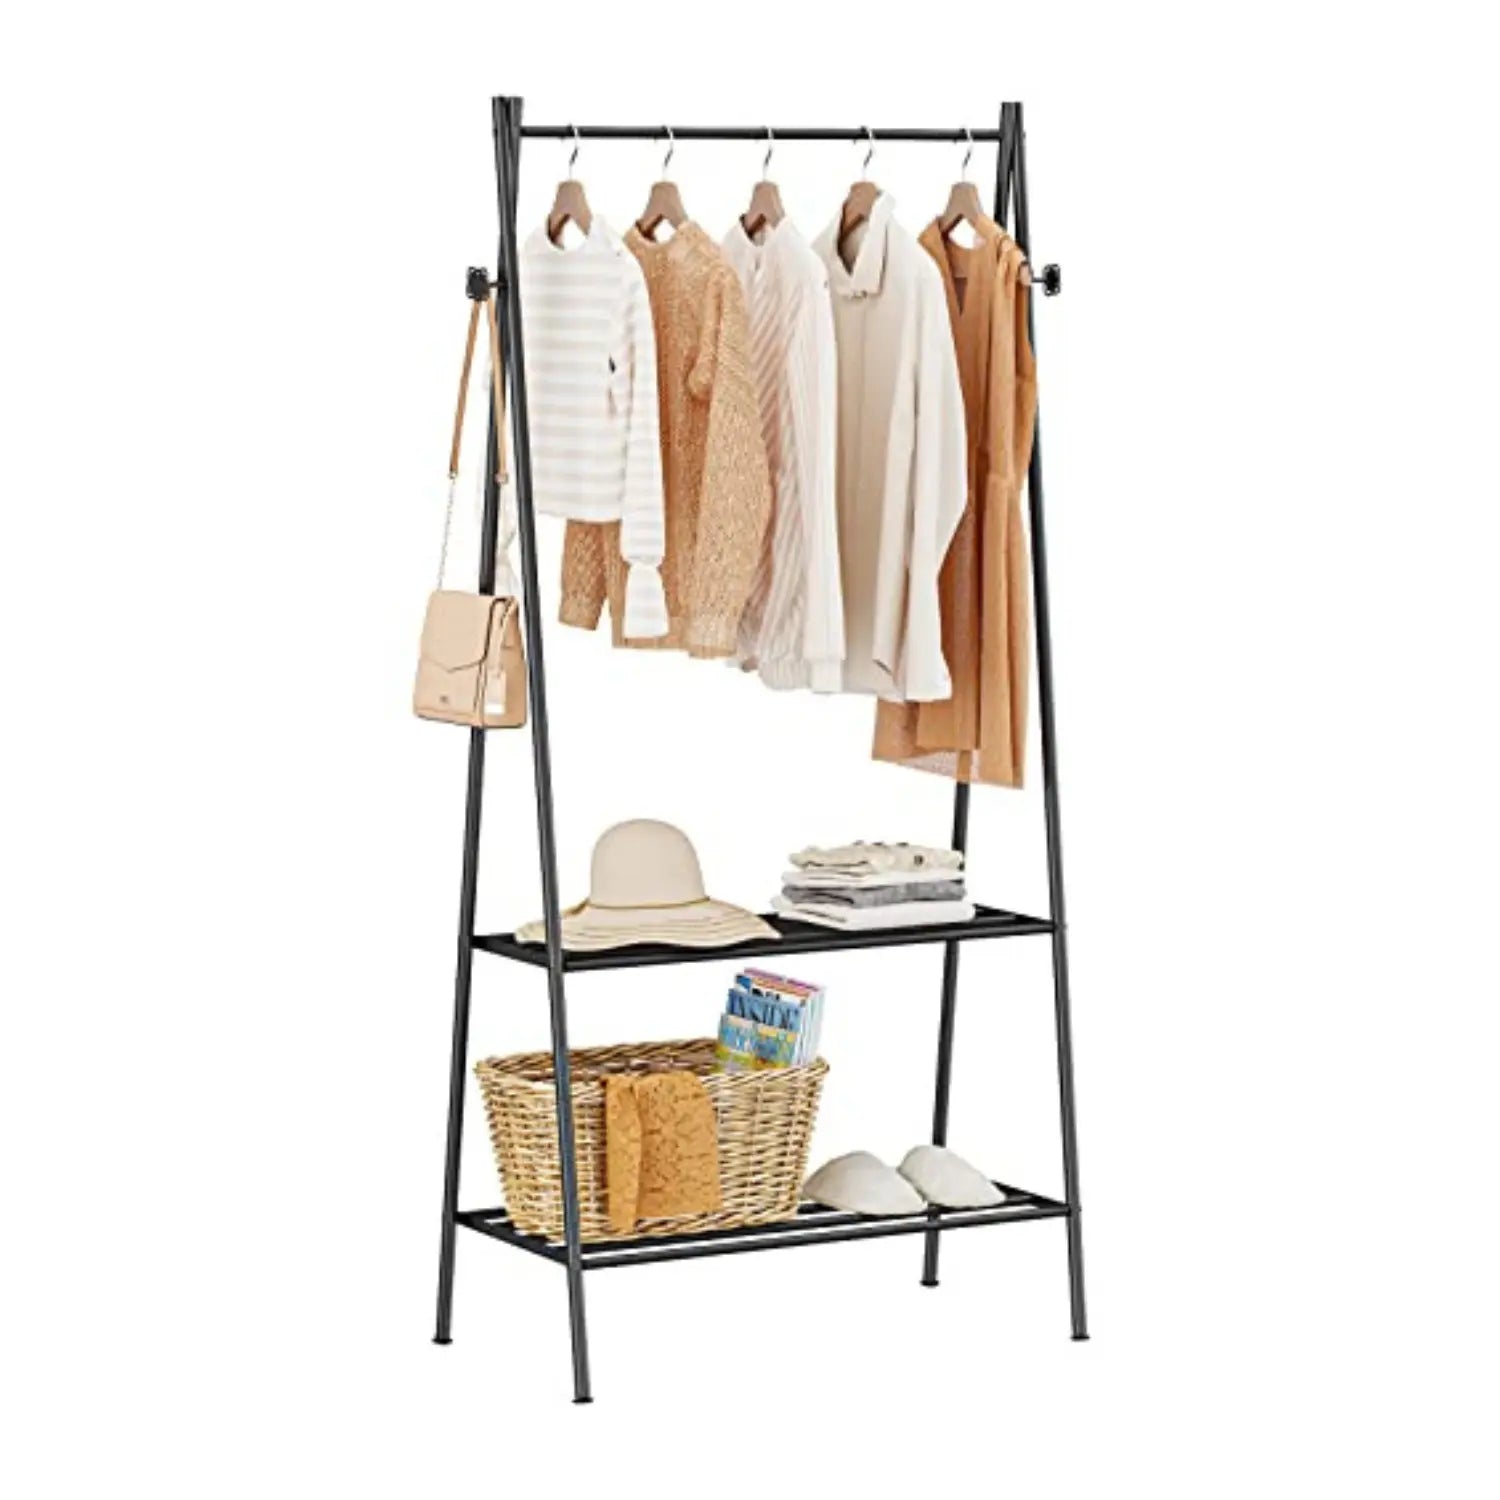 Fanhao Stainless Steel Hanging Clothes Rack